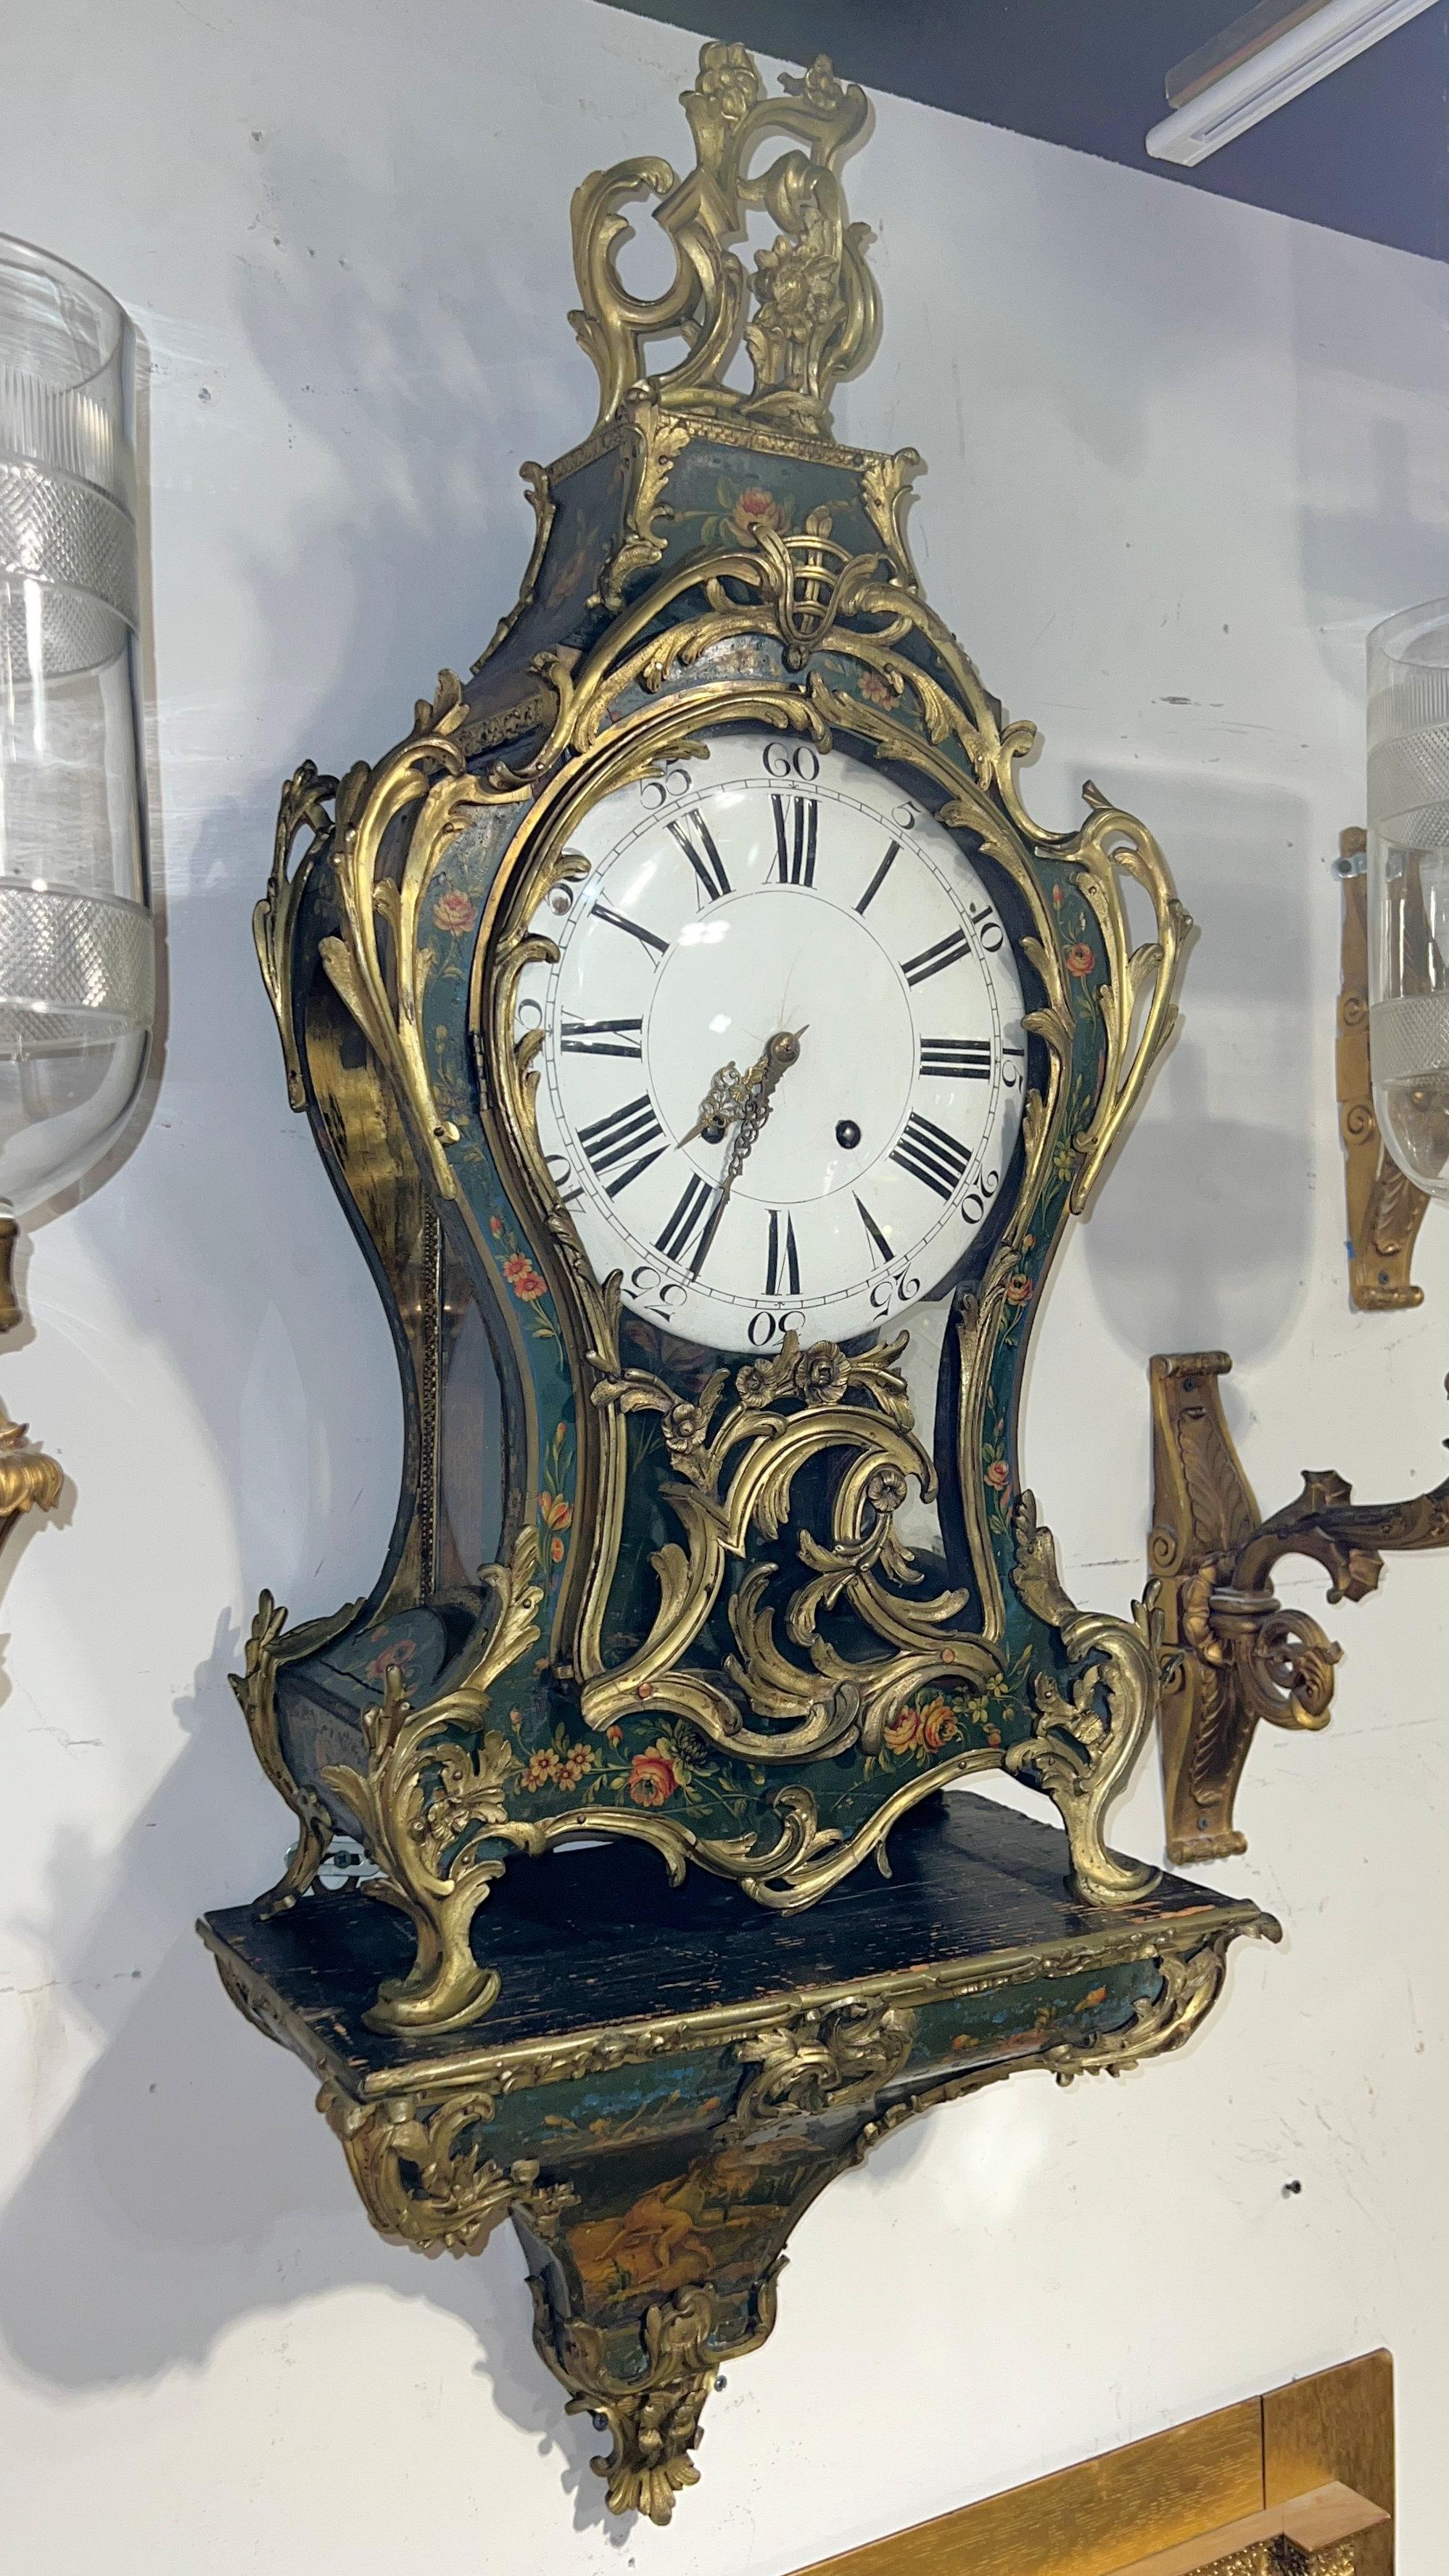 Large, antique French bracket clock in the Louis XV style with wooden case featuring finely painted floral designs and goose and hound at the base, on a green ground with well-cast gilt bronze mounts and original white porcelain face enameled with